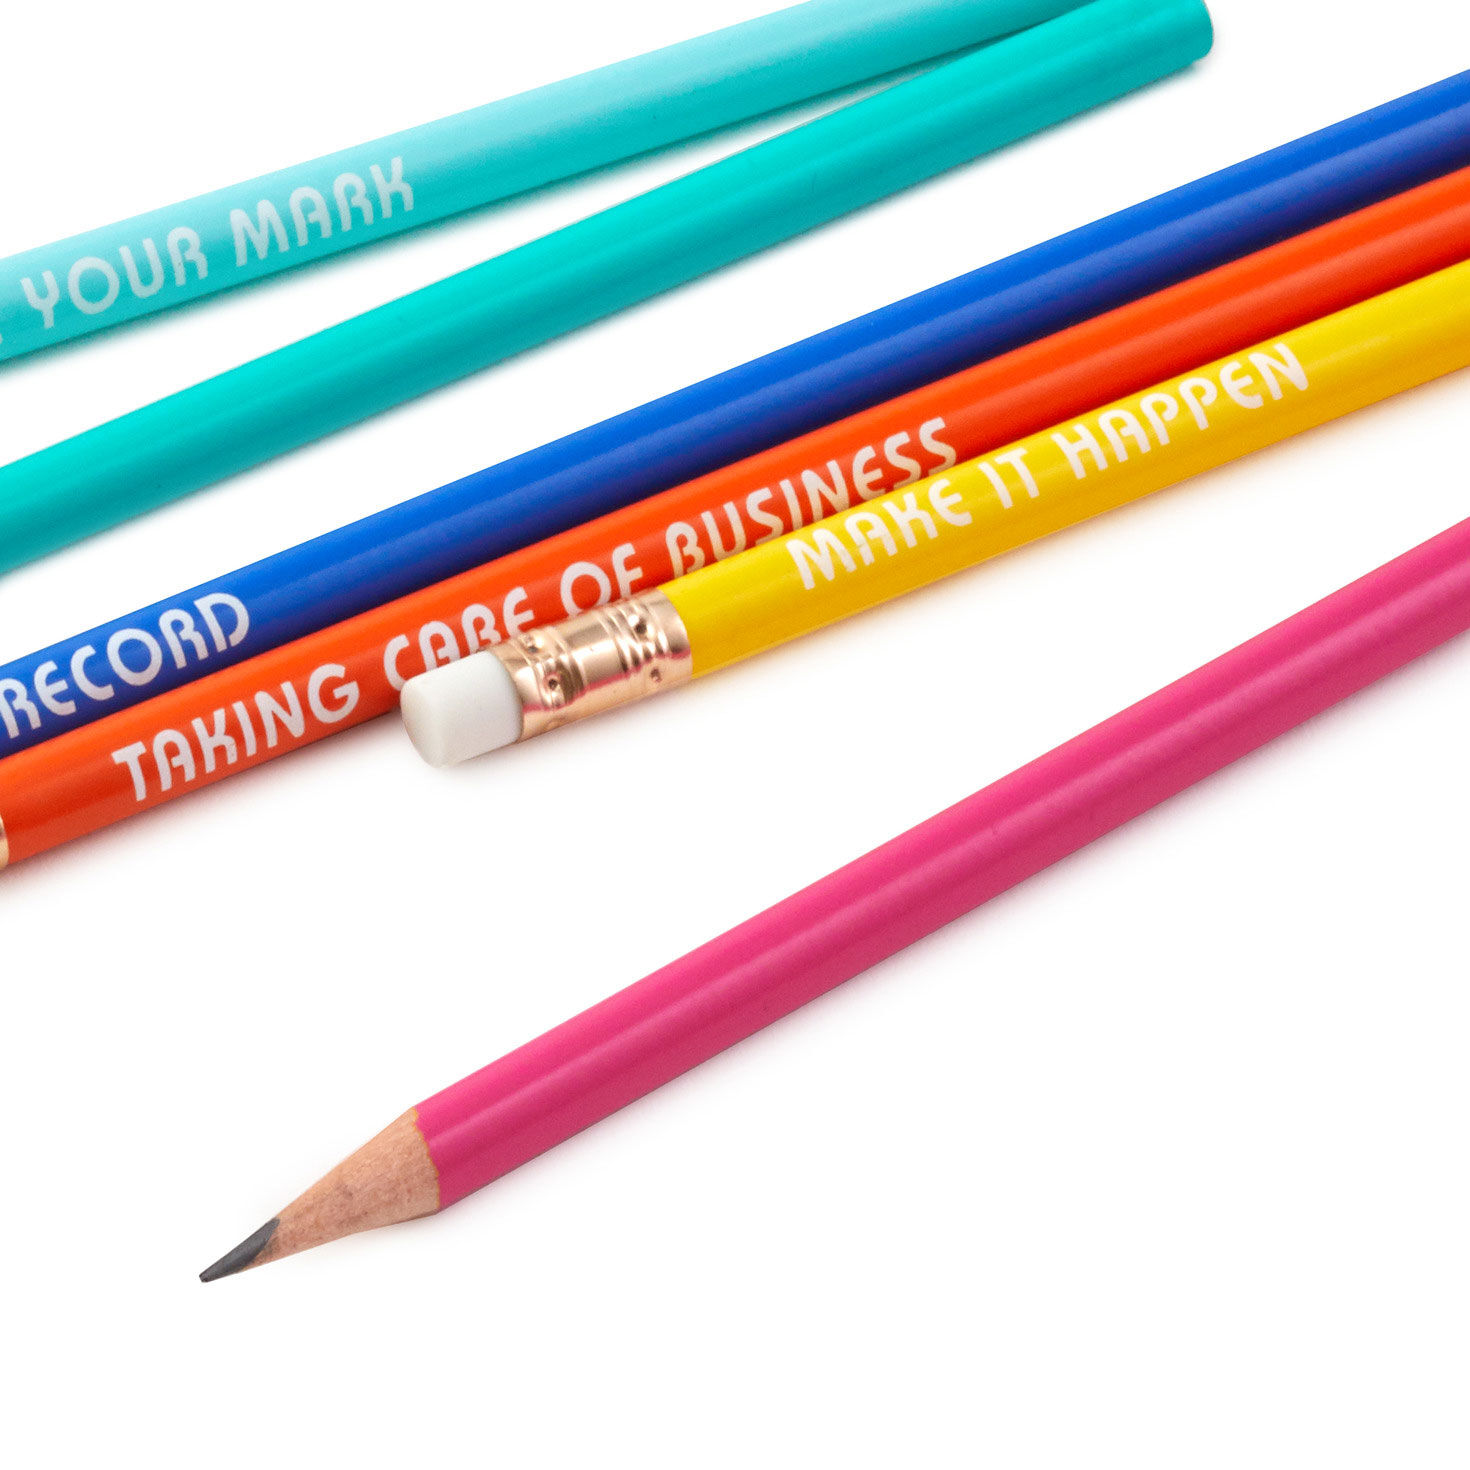 Motivating Messages Wooden Pencils, Pack of 6 for only USD 9.99 | Hallmark